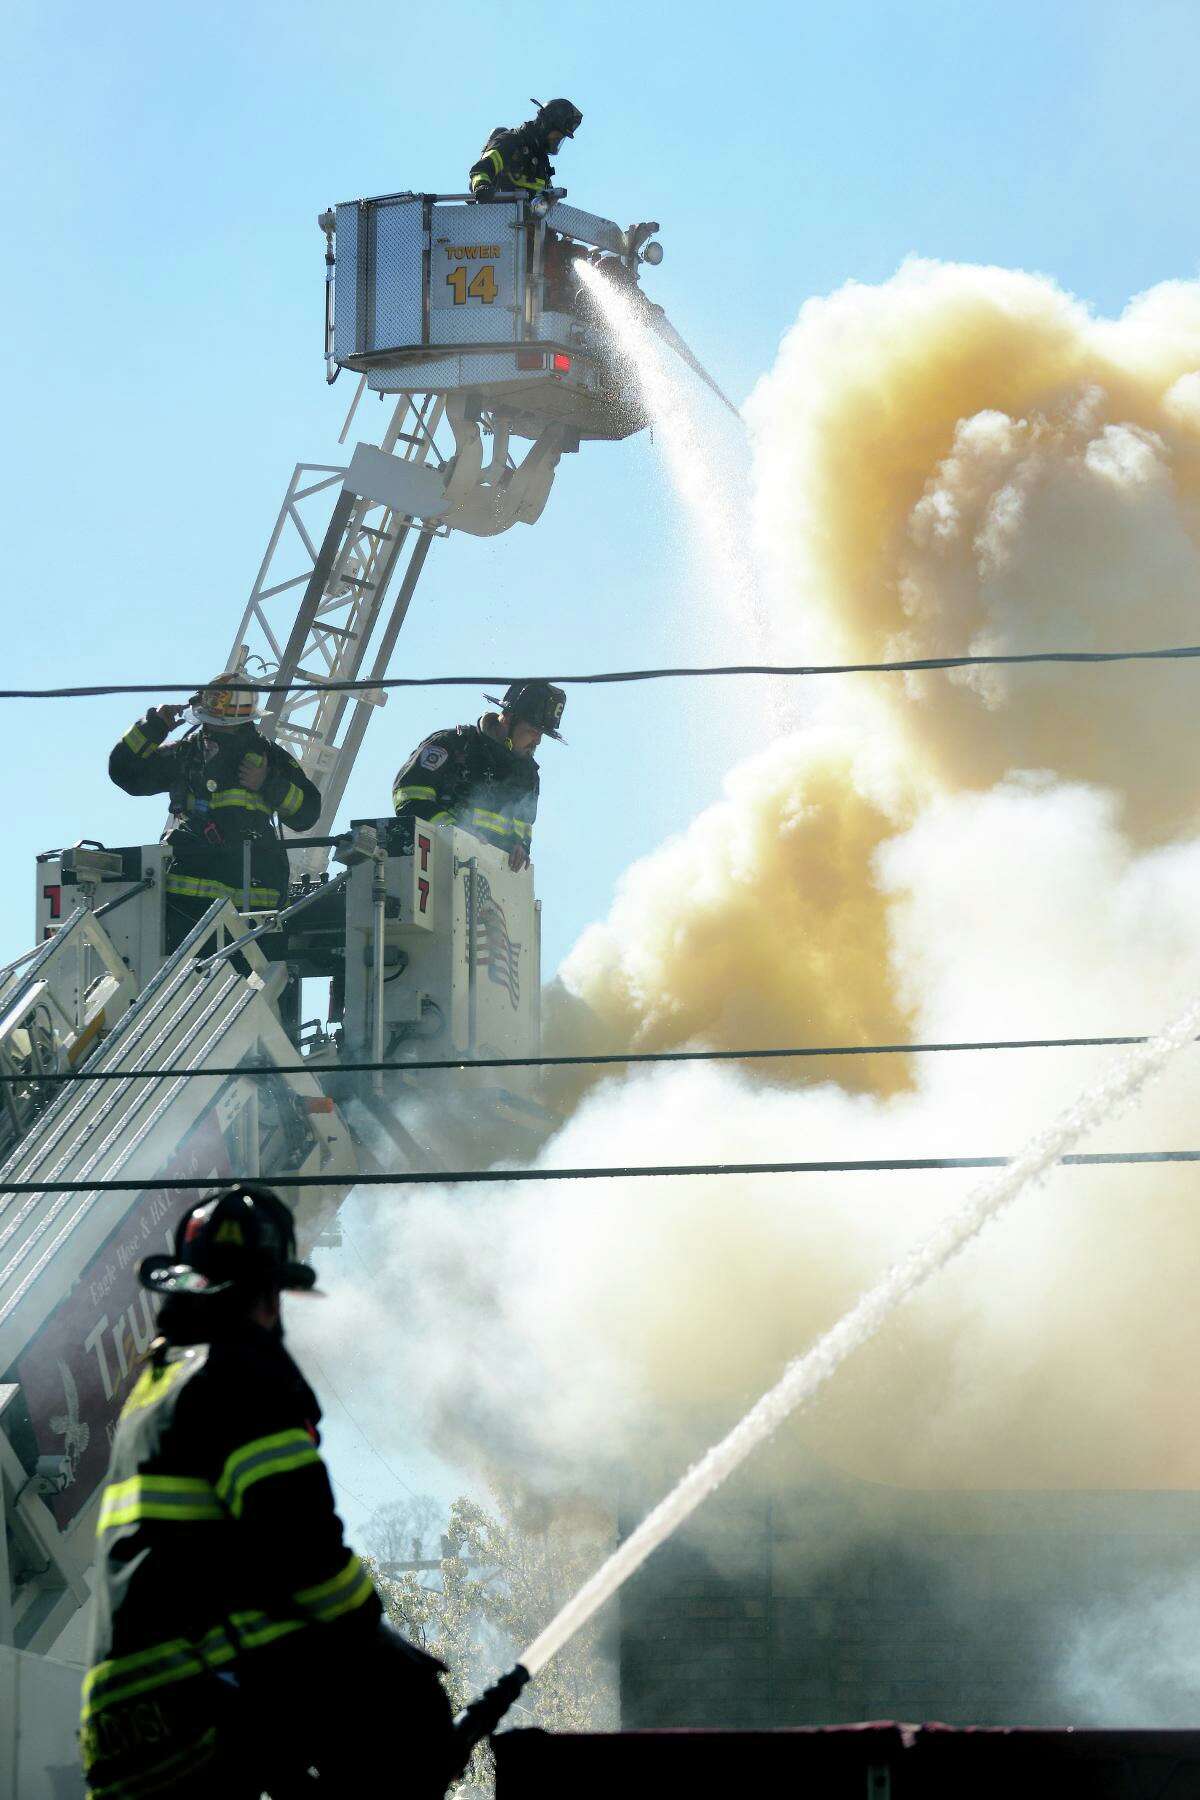 Firefighters from Seymour and other surrounding towns at the scene of a working fire in a building at the intersection of Main St. and Bank St., in Seymour, Conn. April 20, 2022.